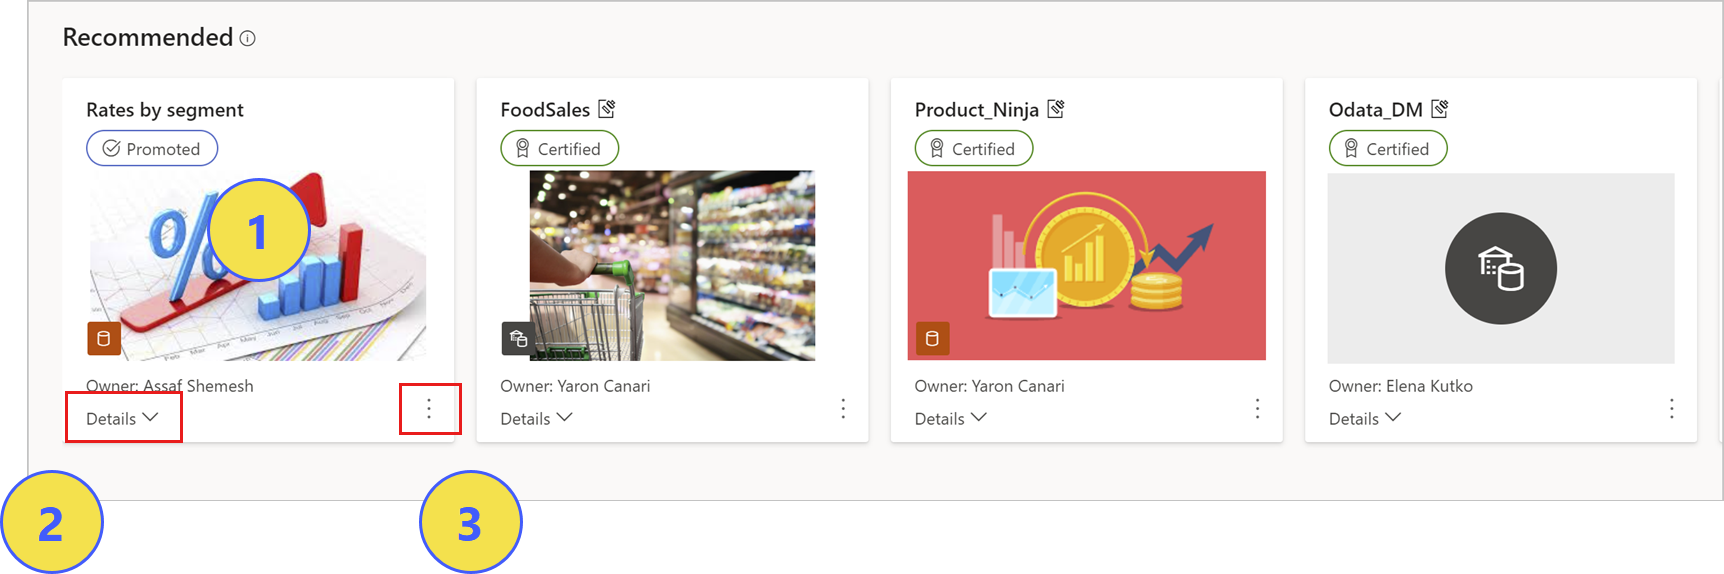 Screenshot of recommended items on the data hub.